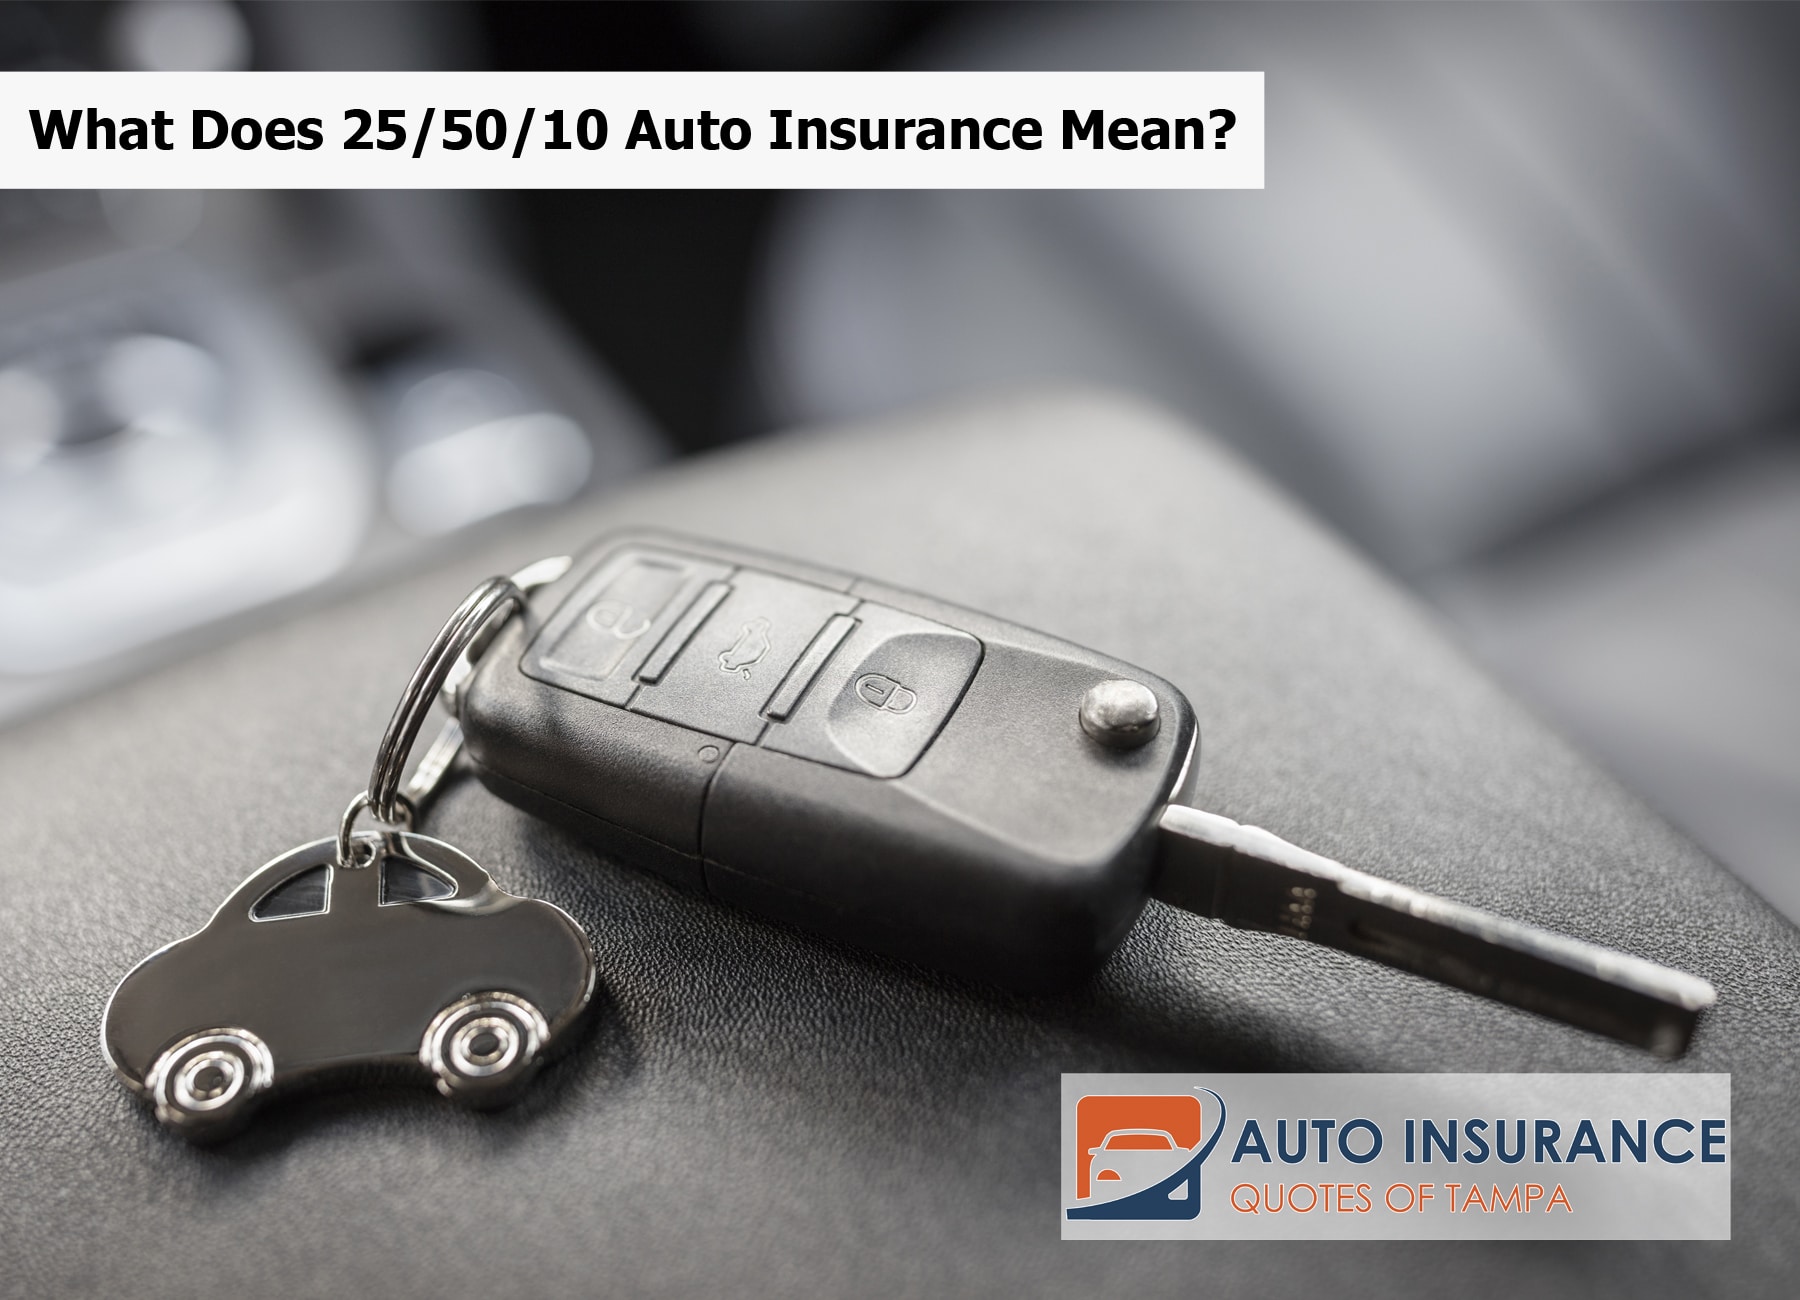 What Does 25/50/10 Auto Insurance Mean?